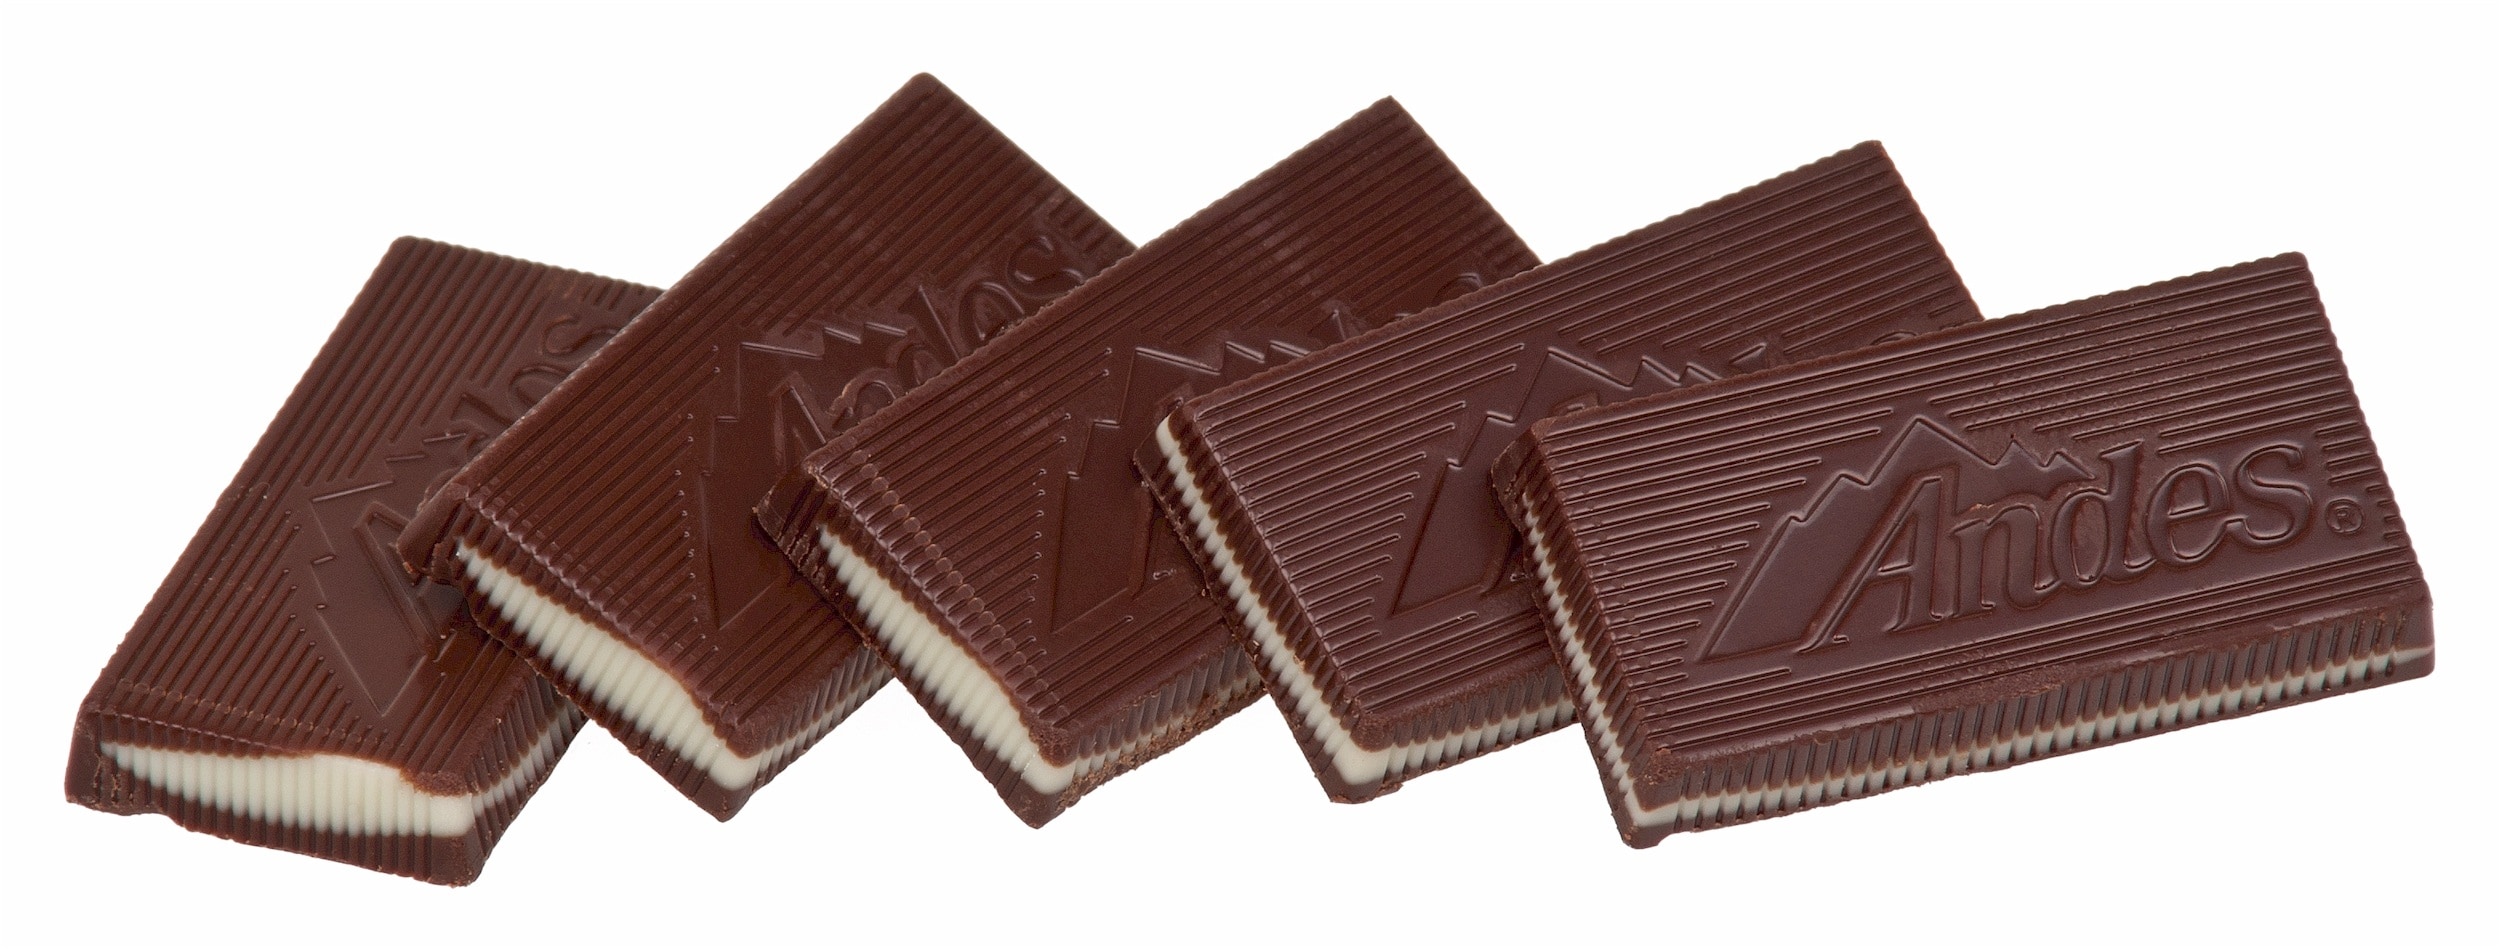 andes chocolate bar